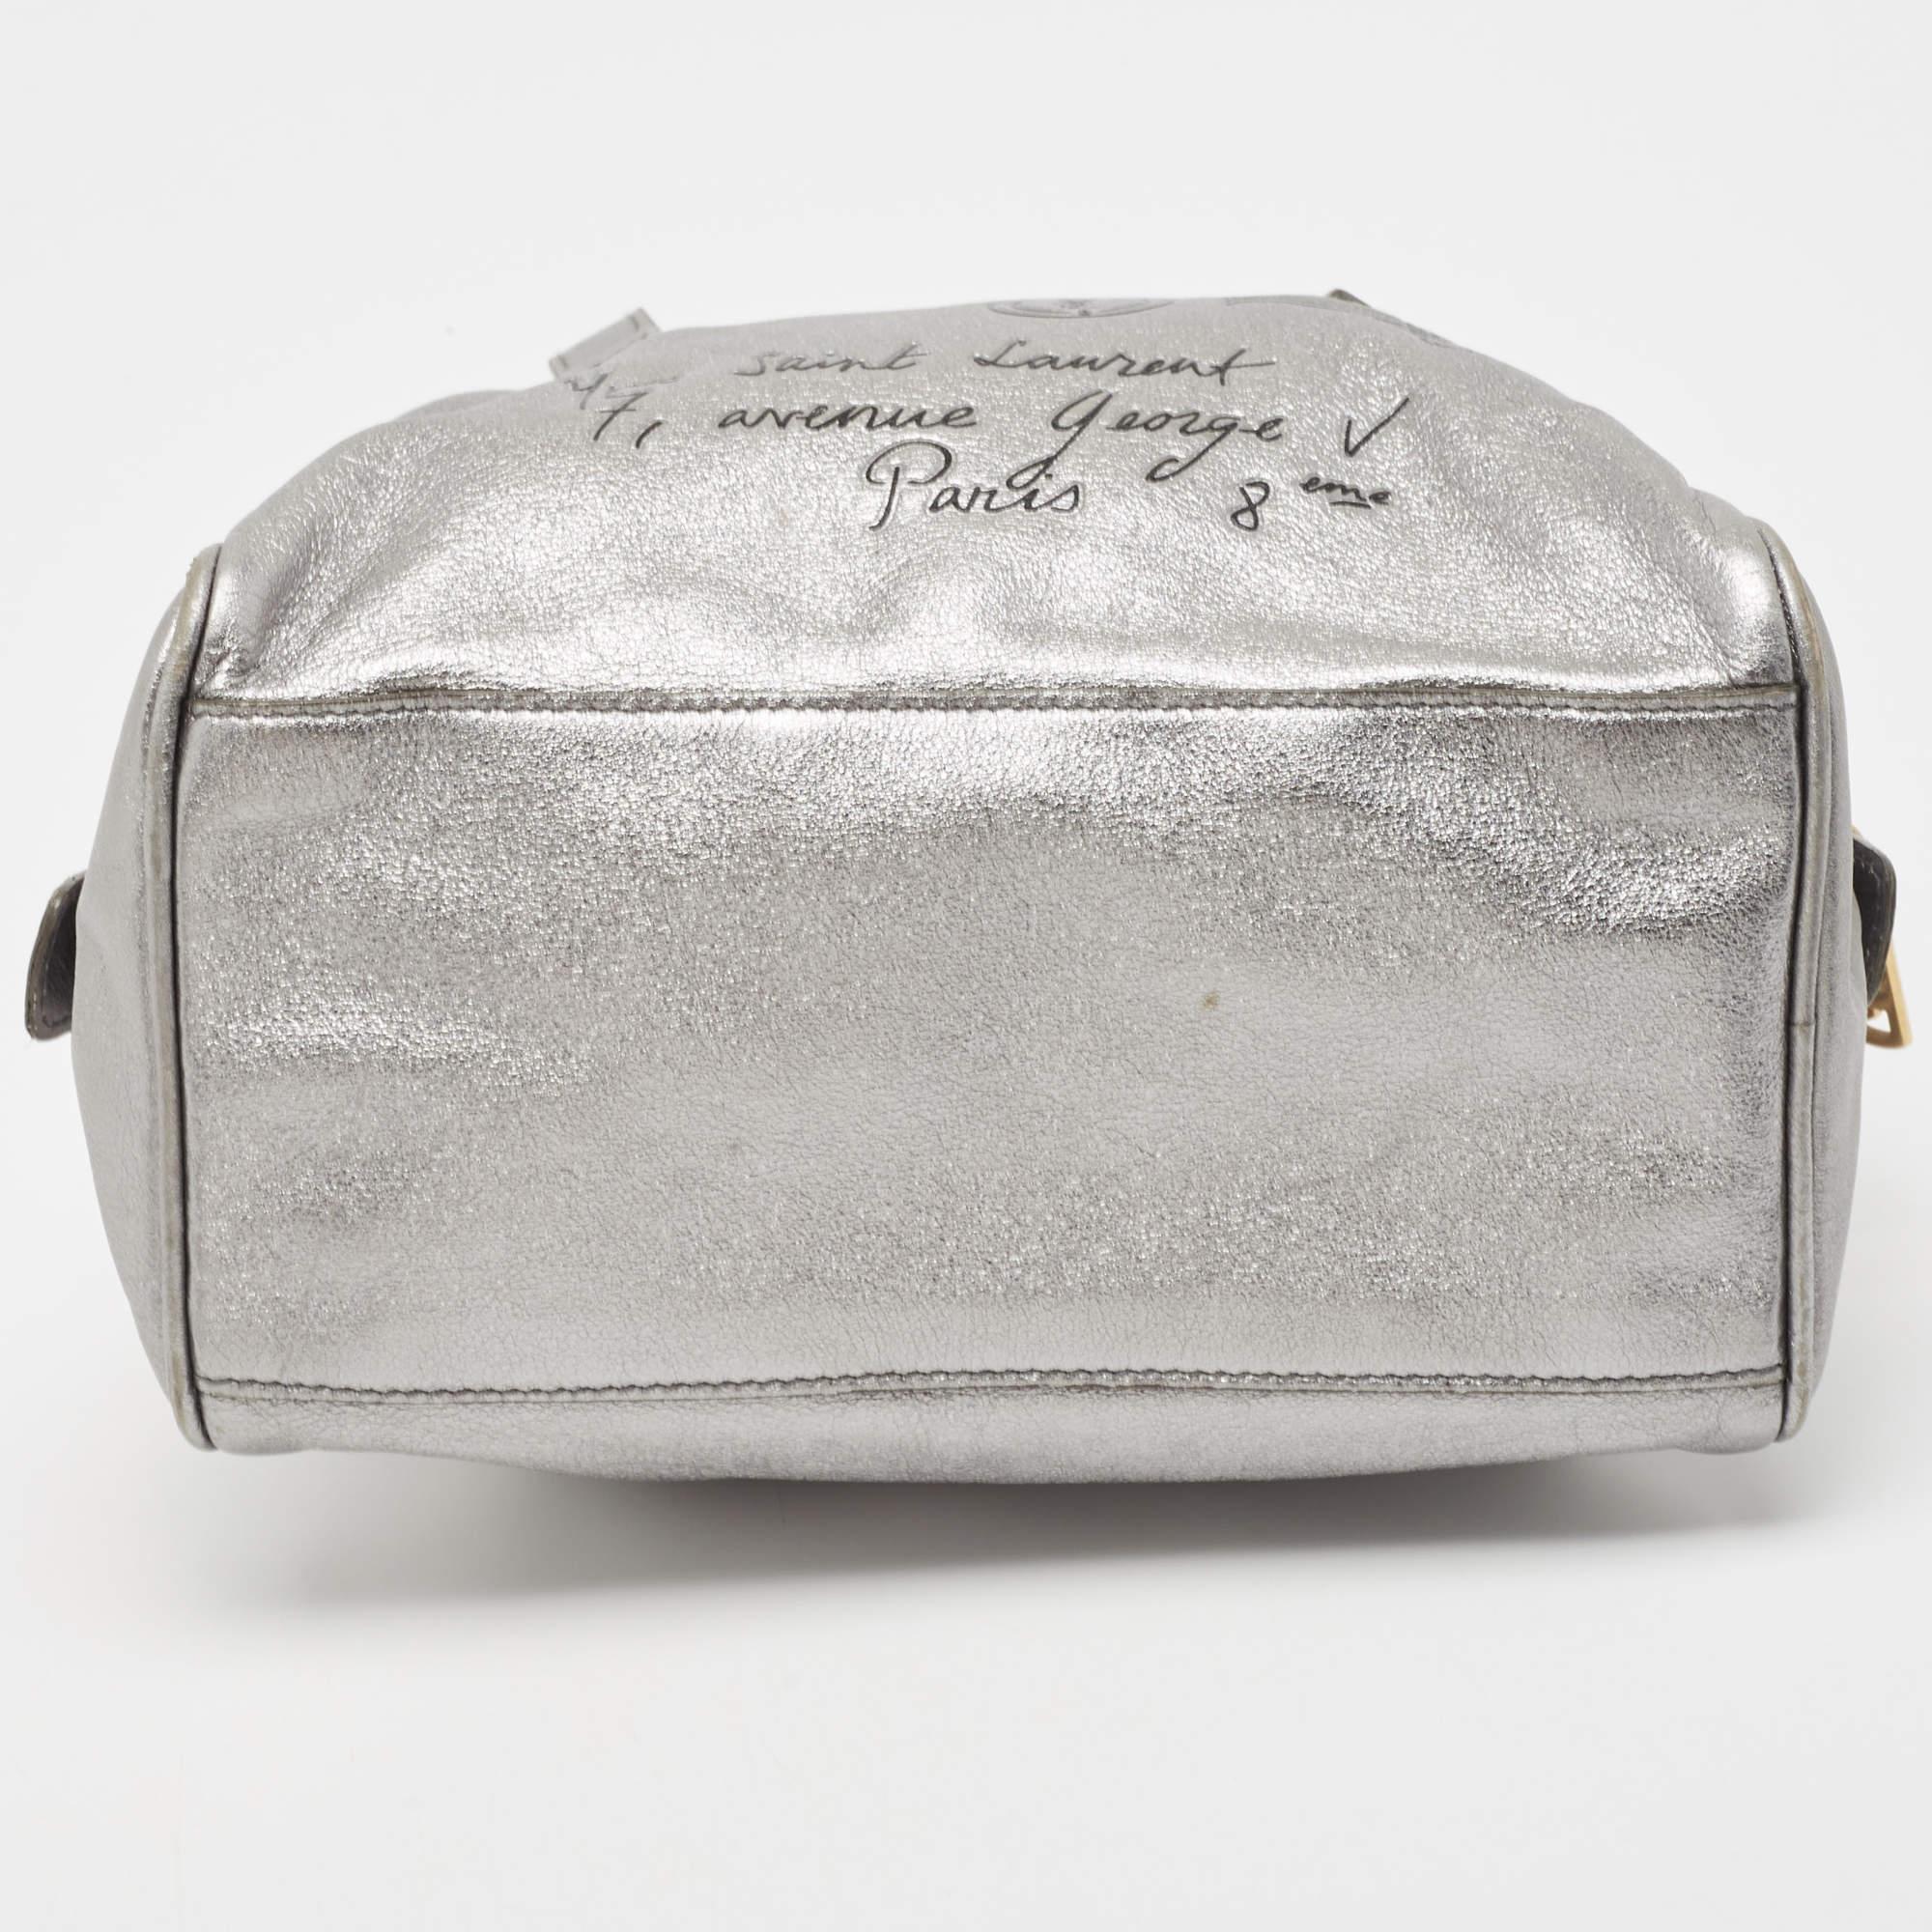 Yves Saint Laurent Silver Leather Y Mail Mini Bag 6